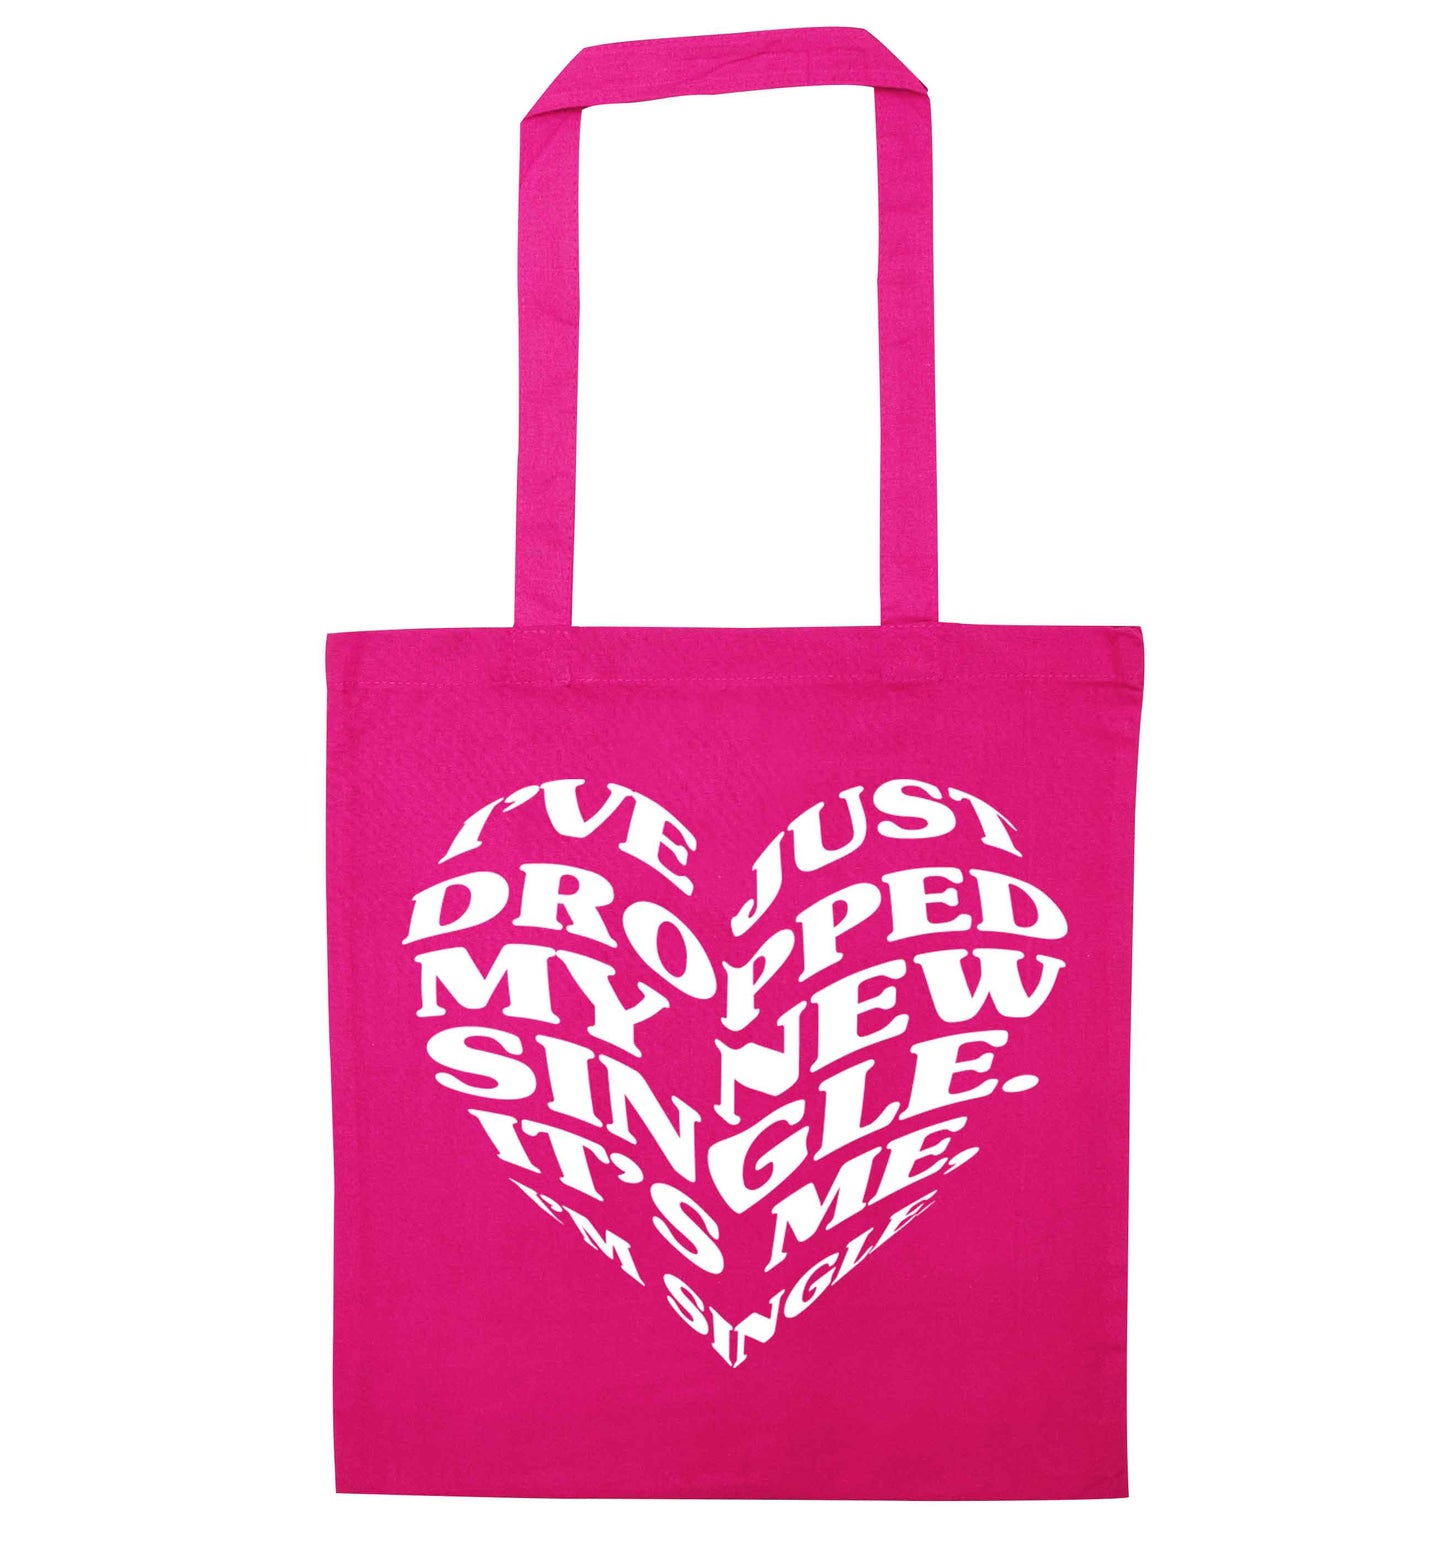 I've just dropped my new single it's me I'm single pink tote bag